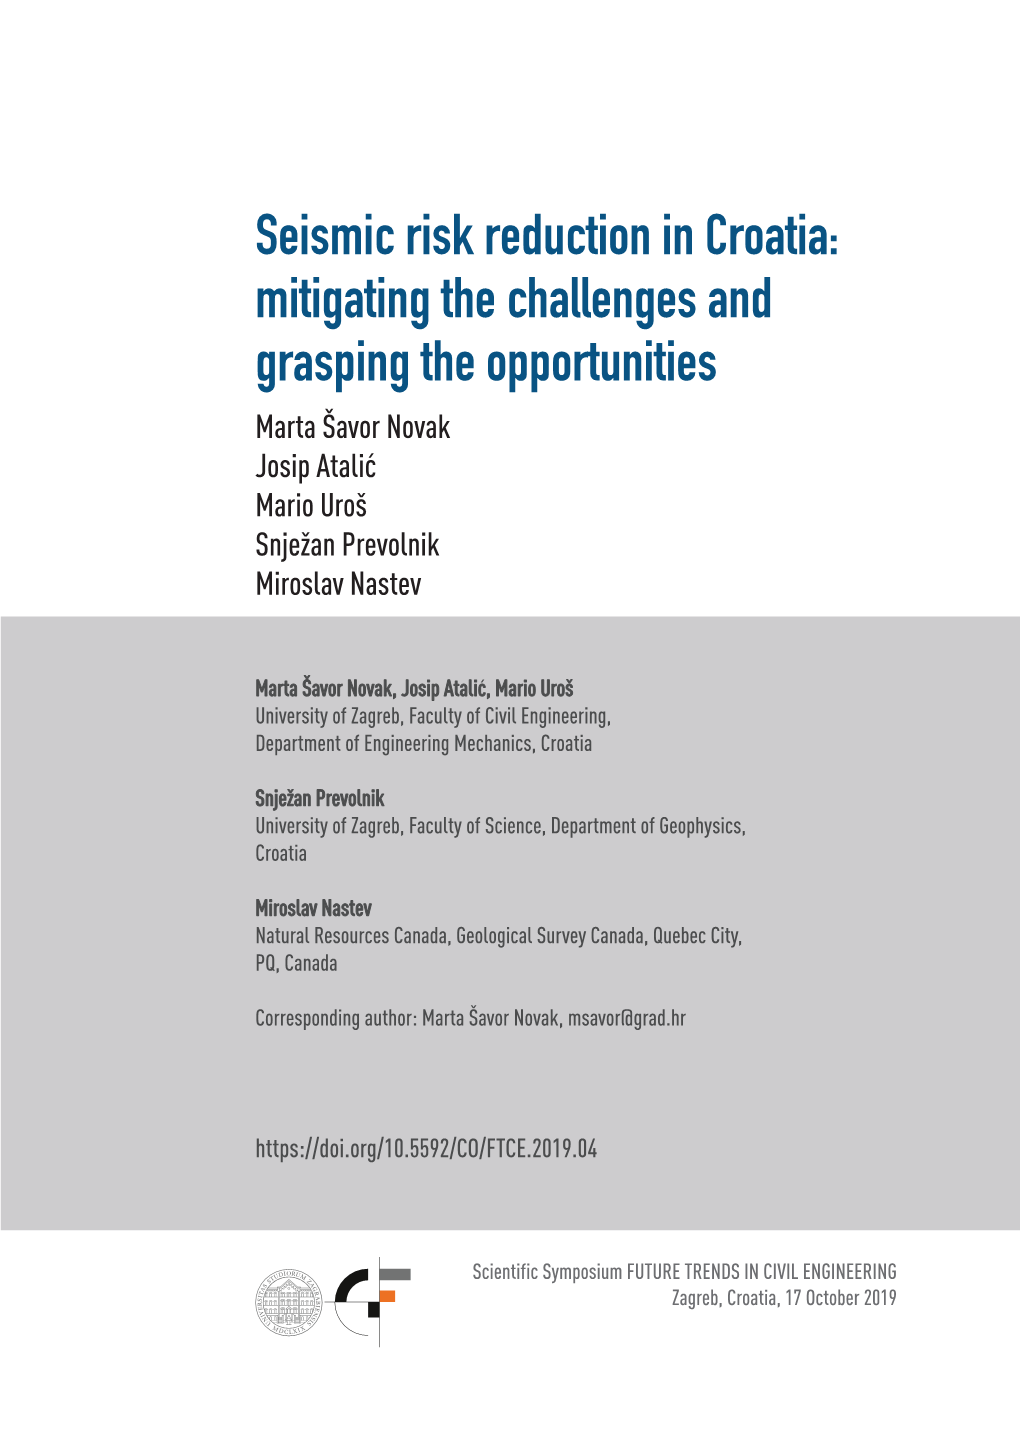 Seismic Risk Reduction in Croatia: Mitigating the Challenges and Grasping the Opportunities